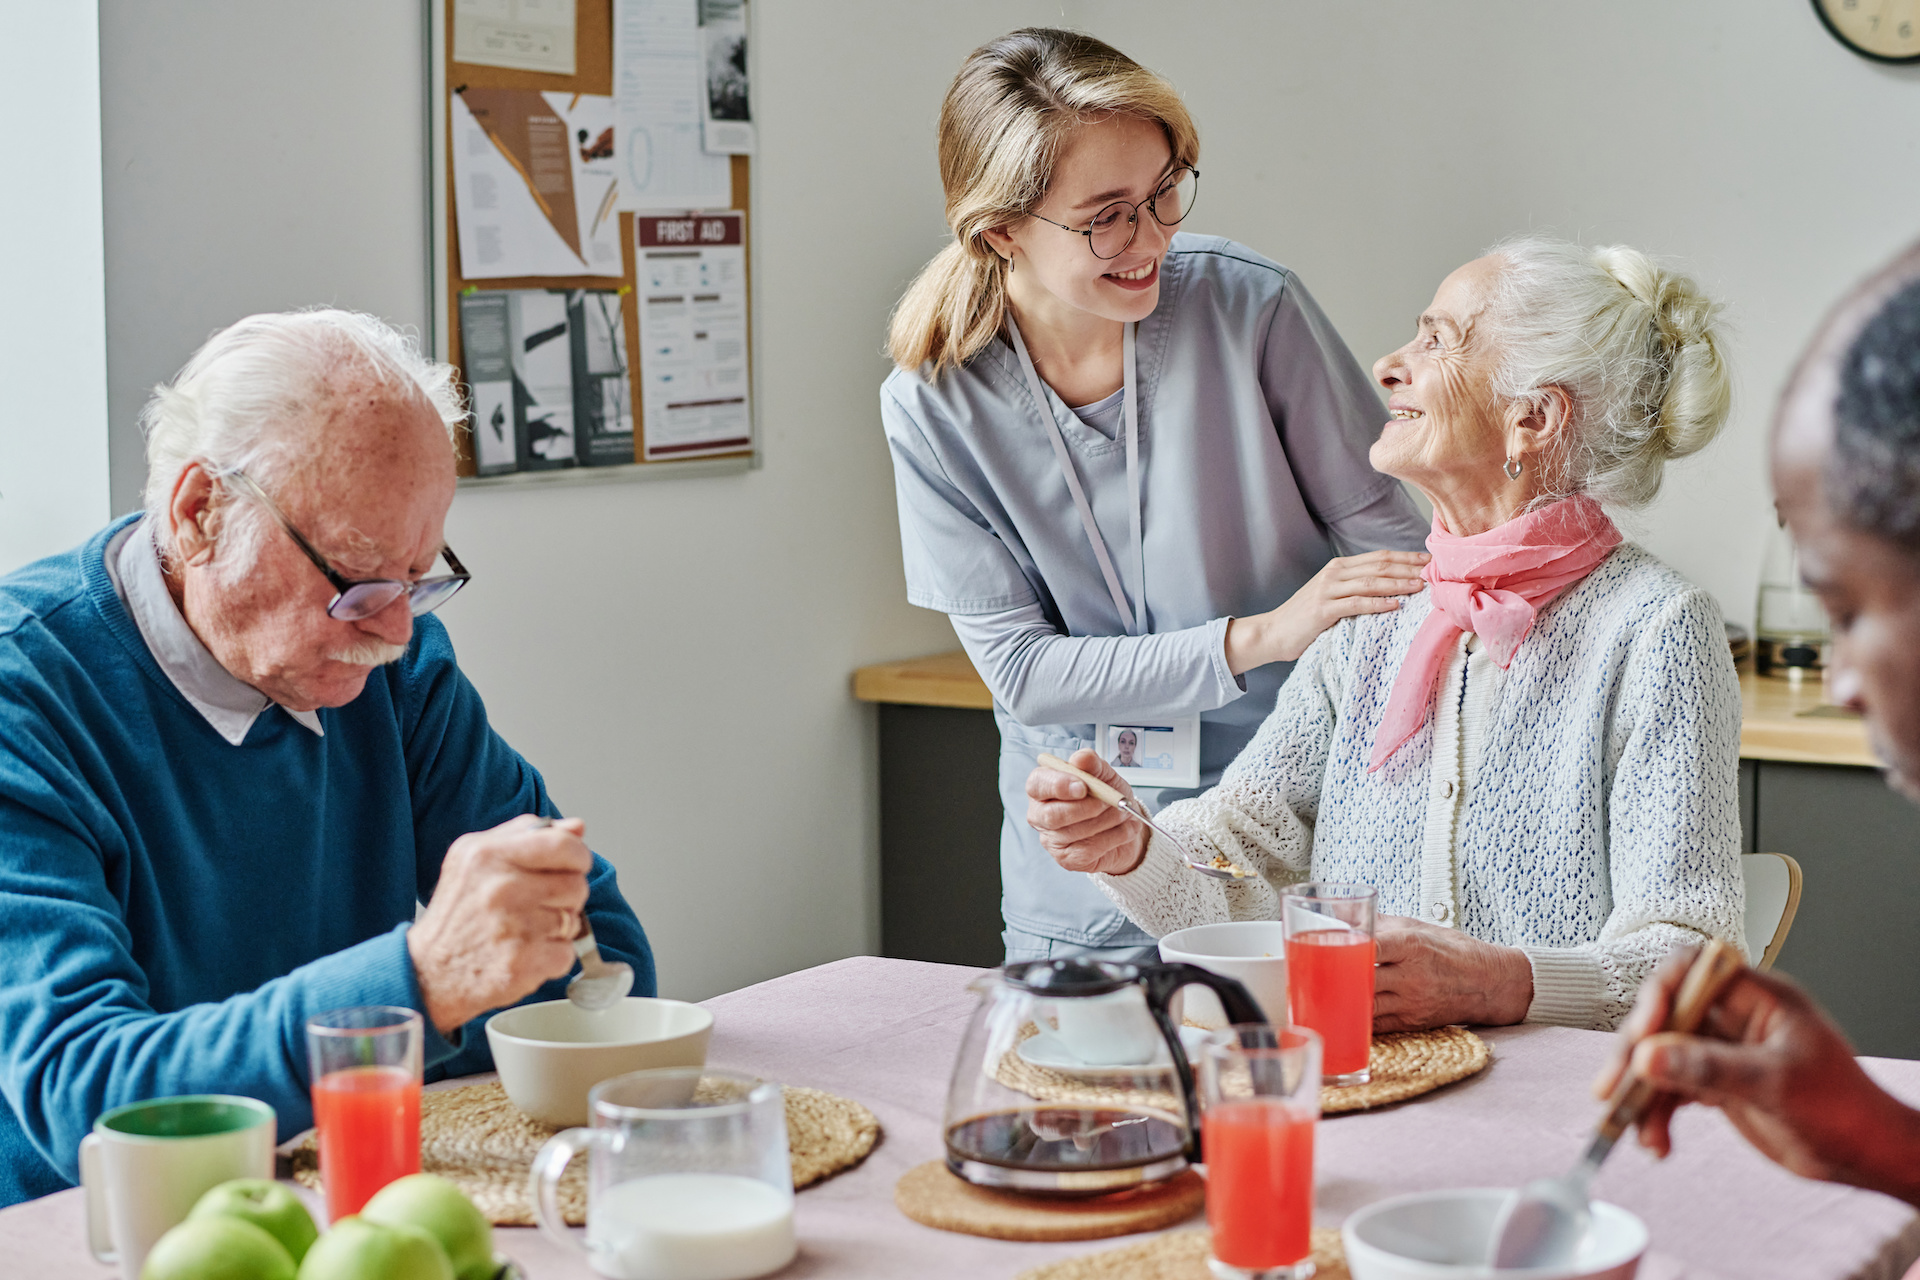 Caregiver helping senior people during lunch